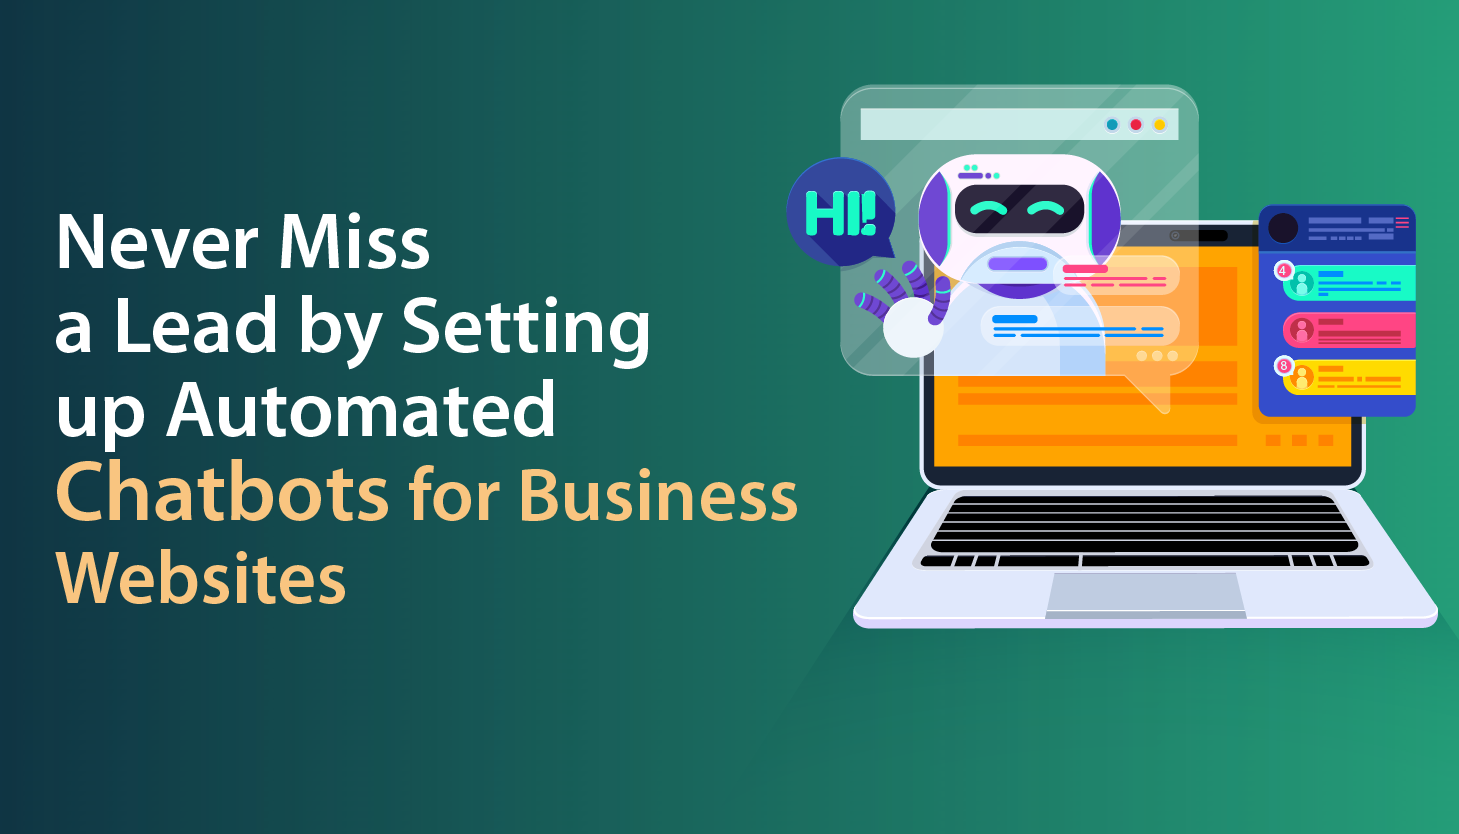  Never Miss a Lead by Setting up Chatbots for Business Websites